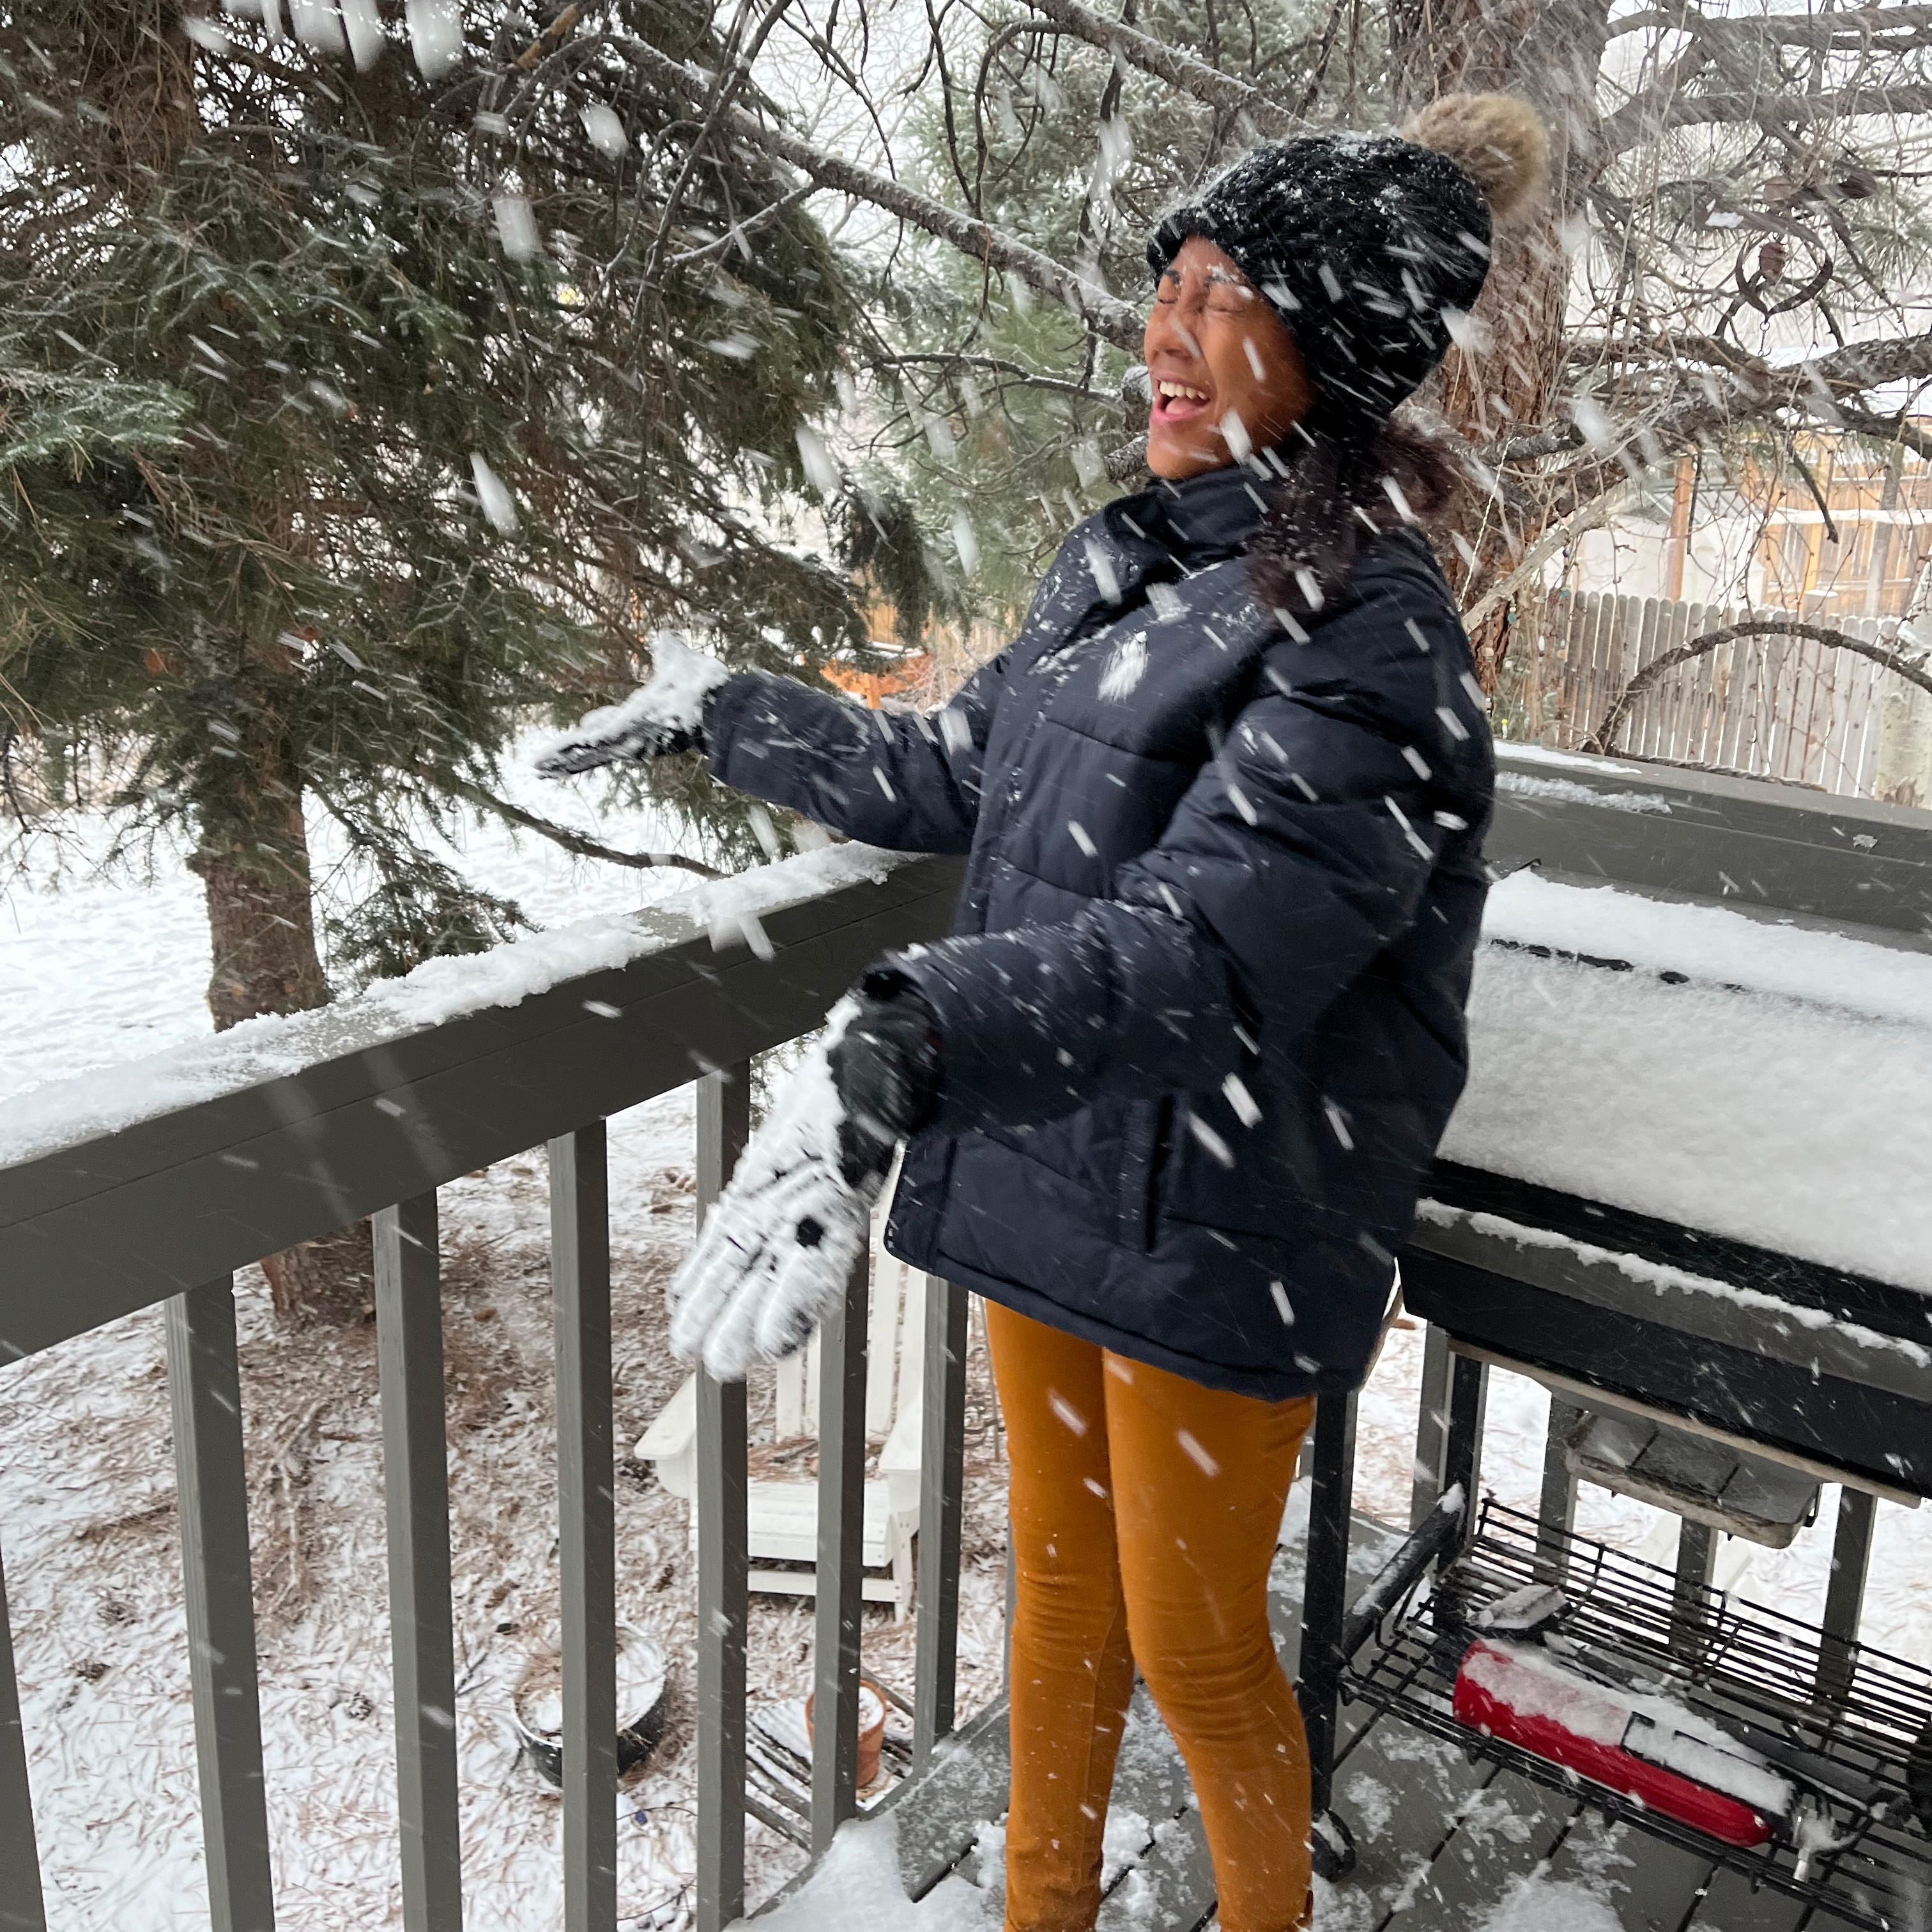 Belize educator Yurelie Casanov experiencing snow for the first time